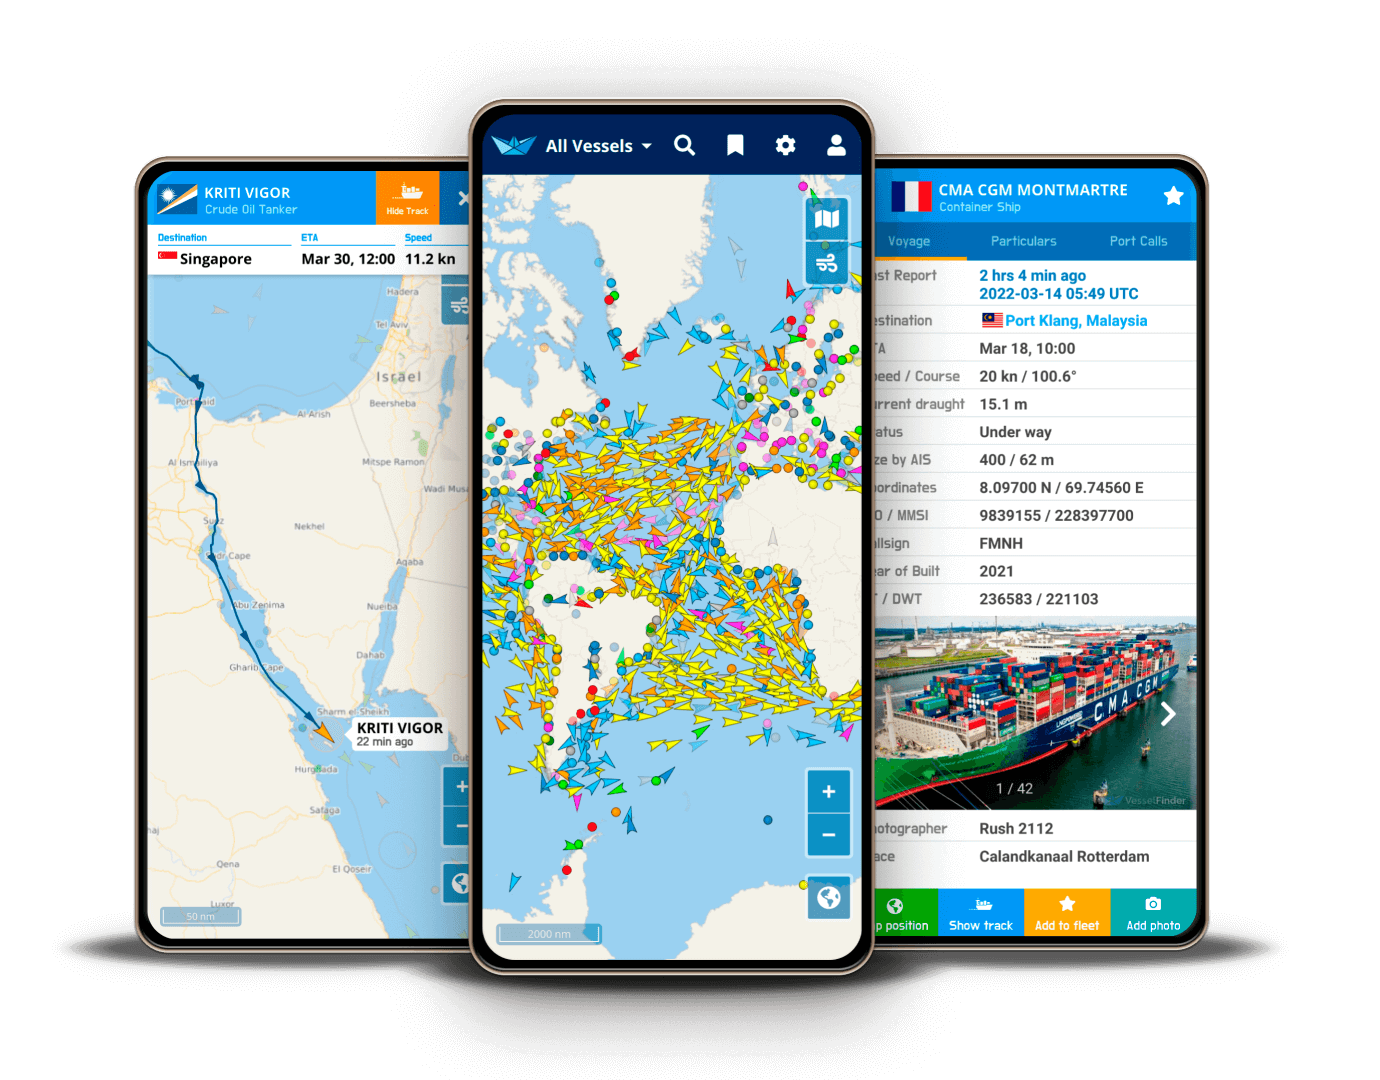 Download the VesselFinder Mobile App on the iOS App Store or Google Play Store